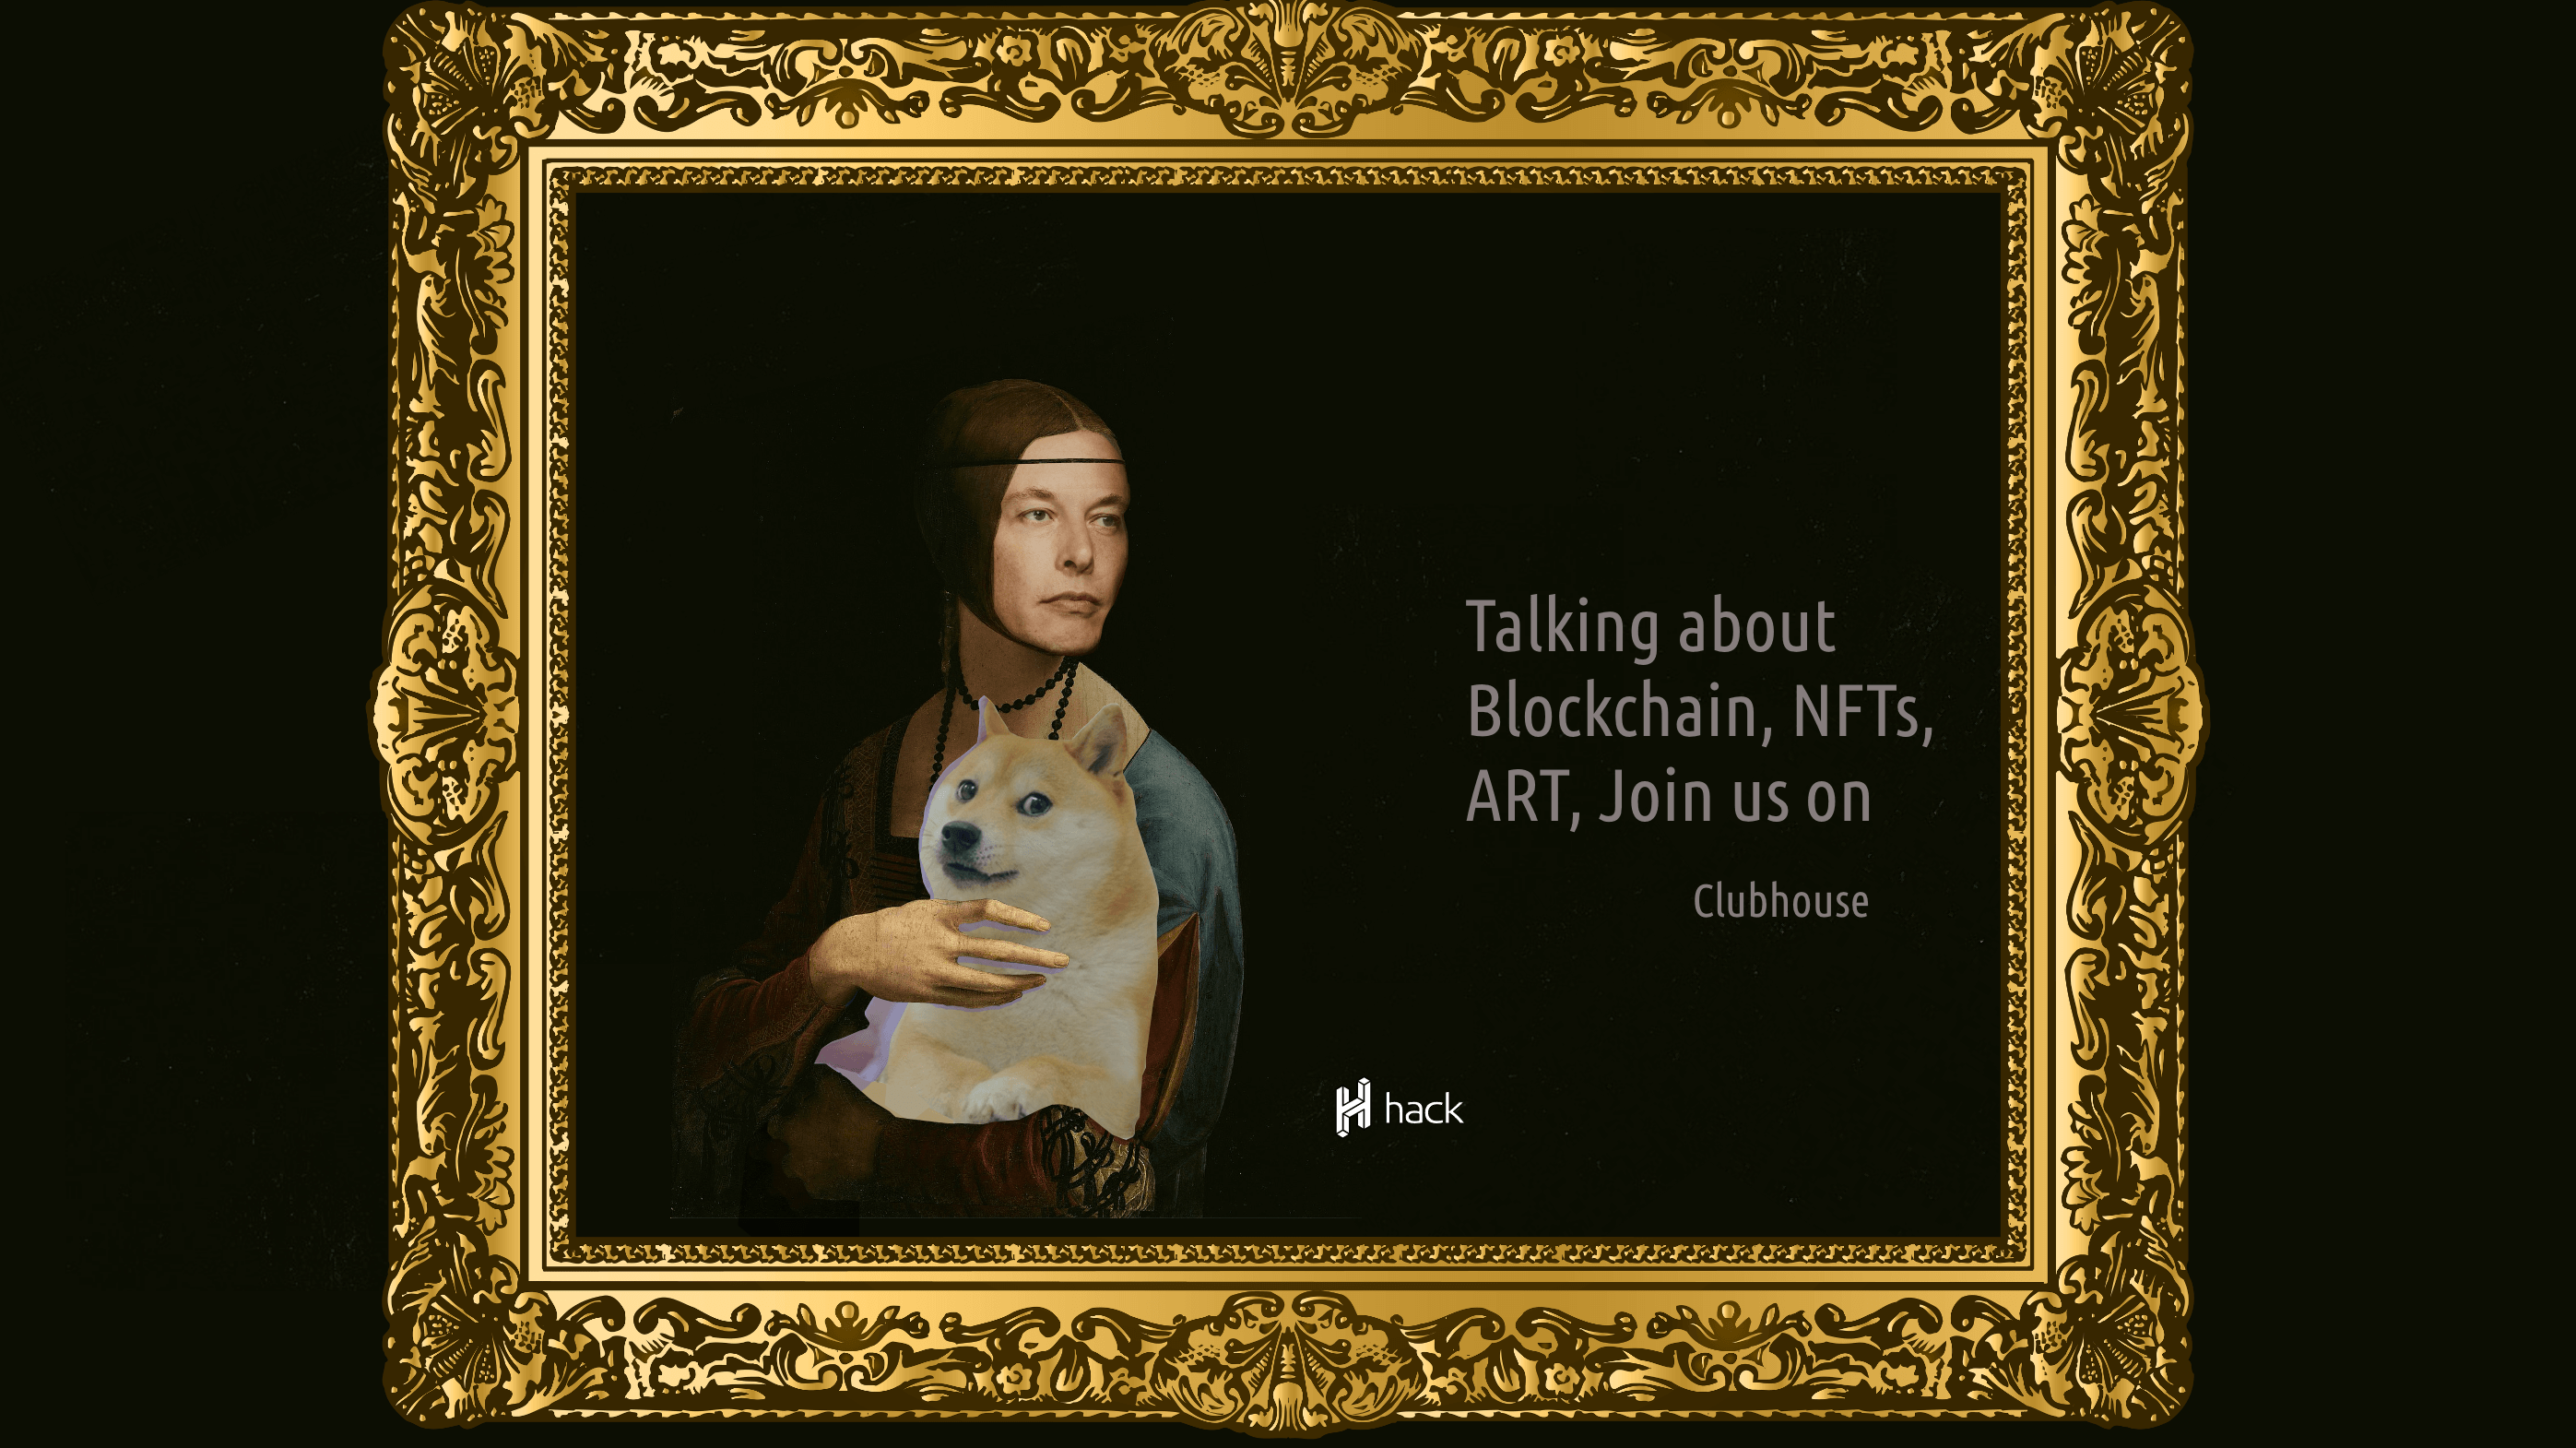 Cover Image for Talking about Blockchain, NFTs, ART, Join us on Clubhouse App